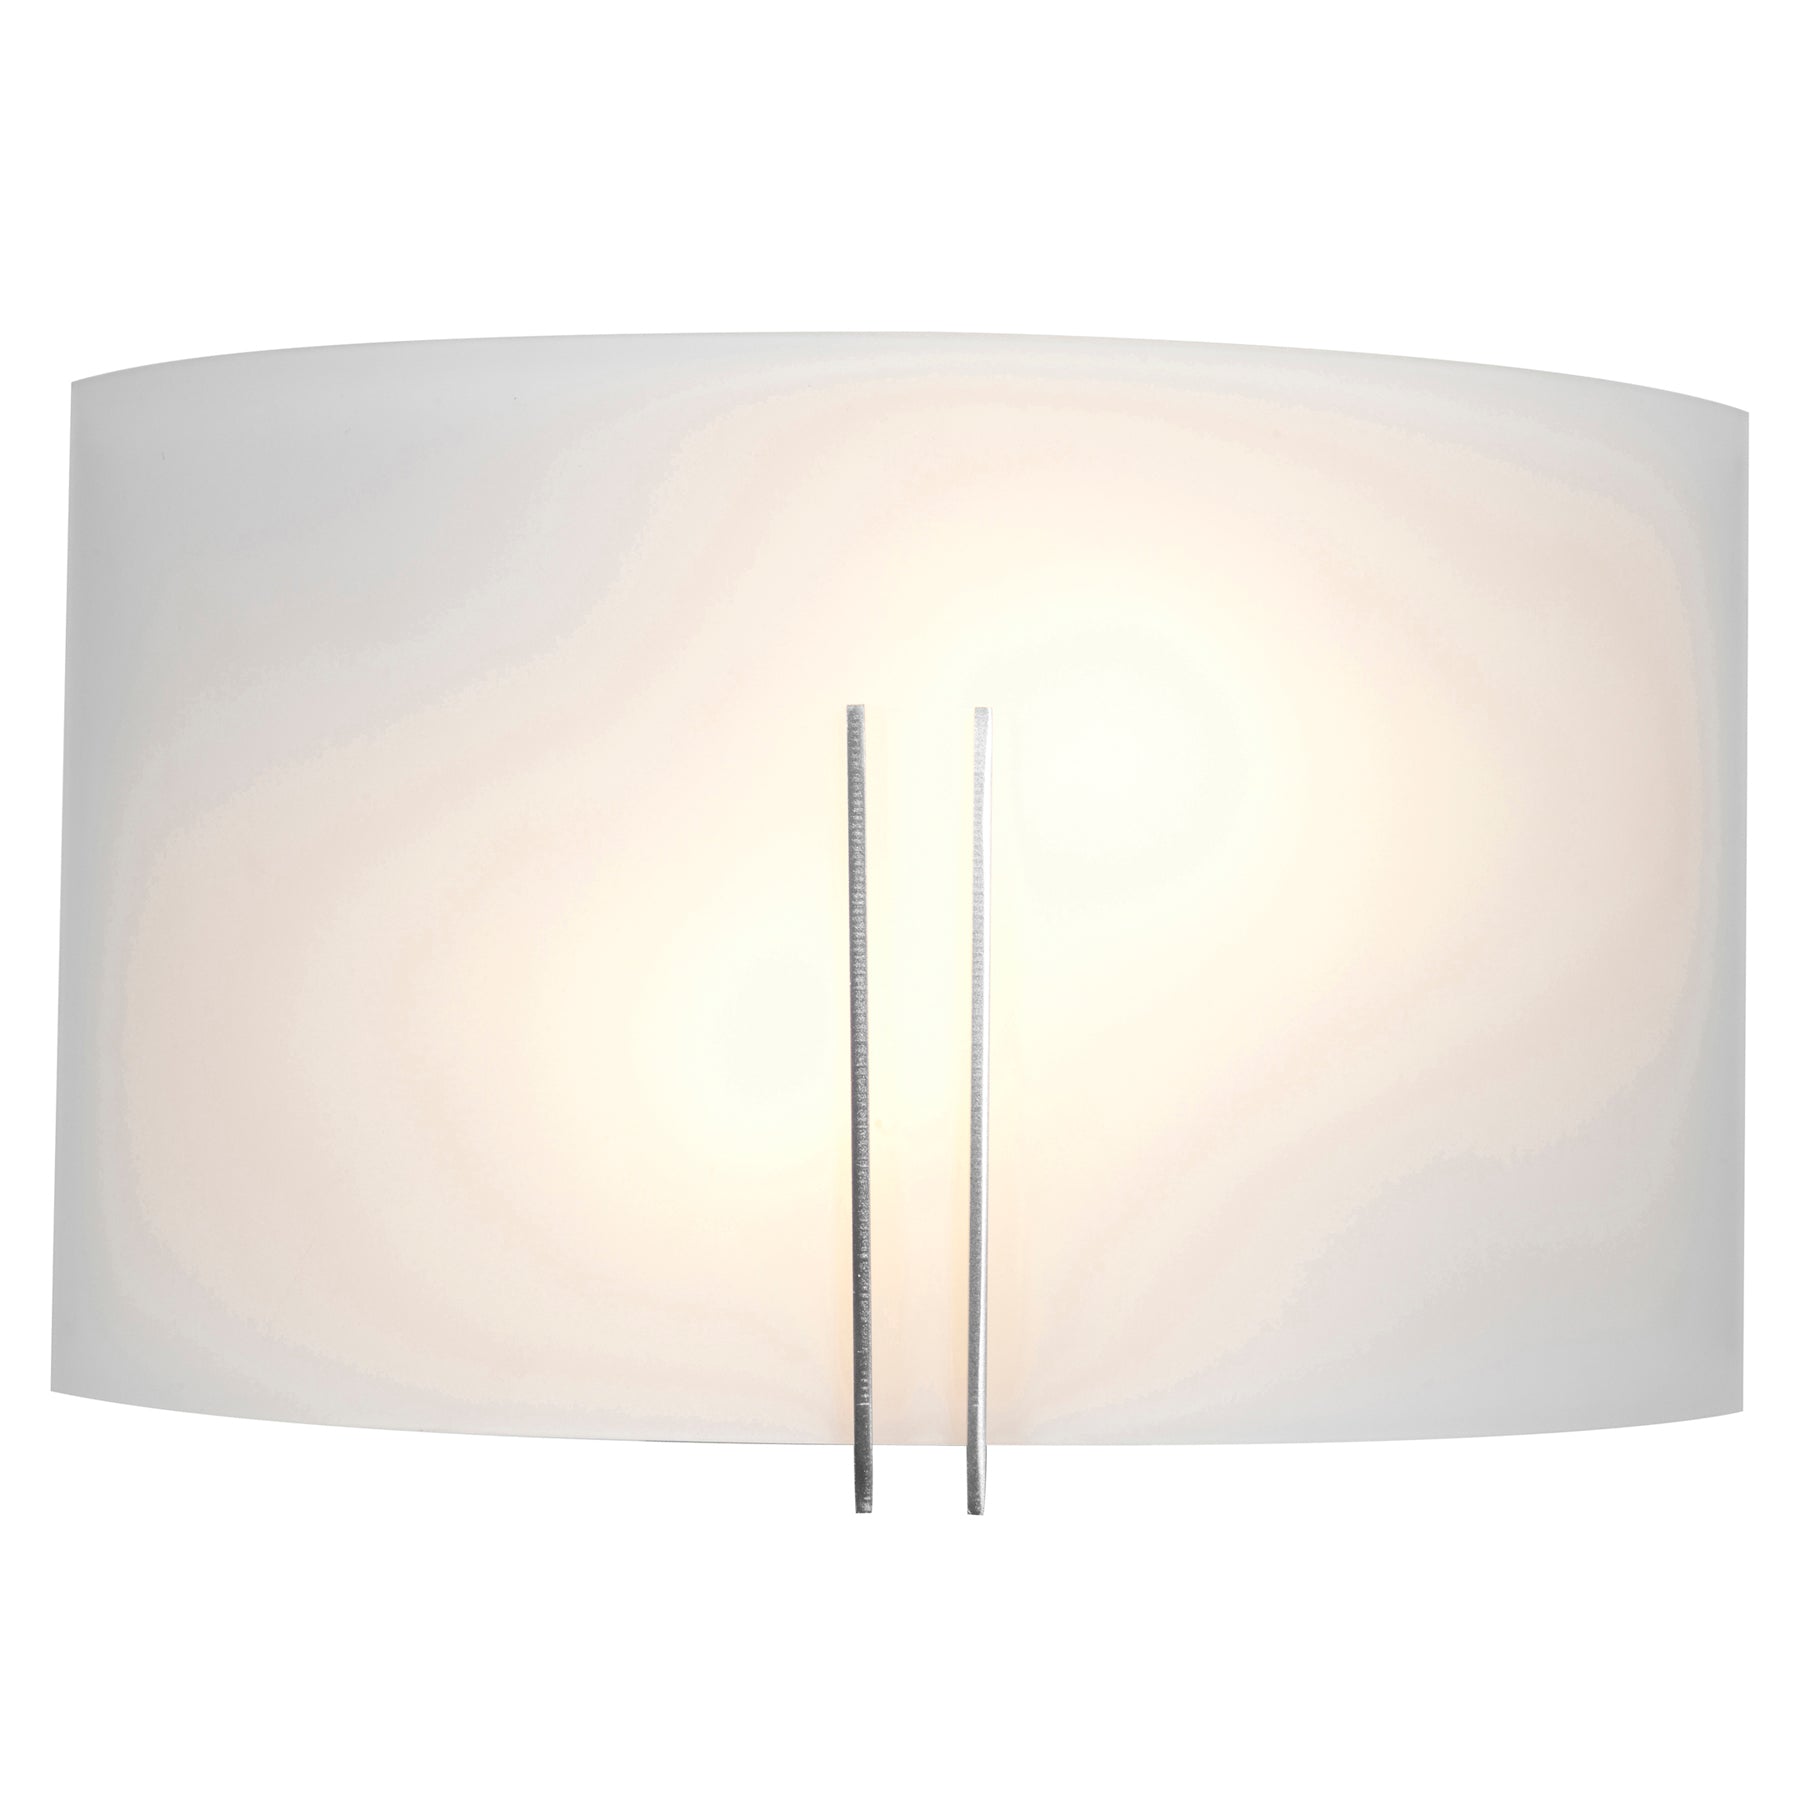 Prong 7.5in. LED Wall Lighting (Brushed Steel)